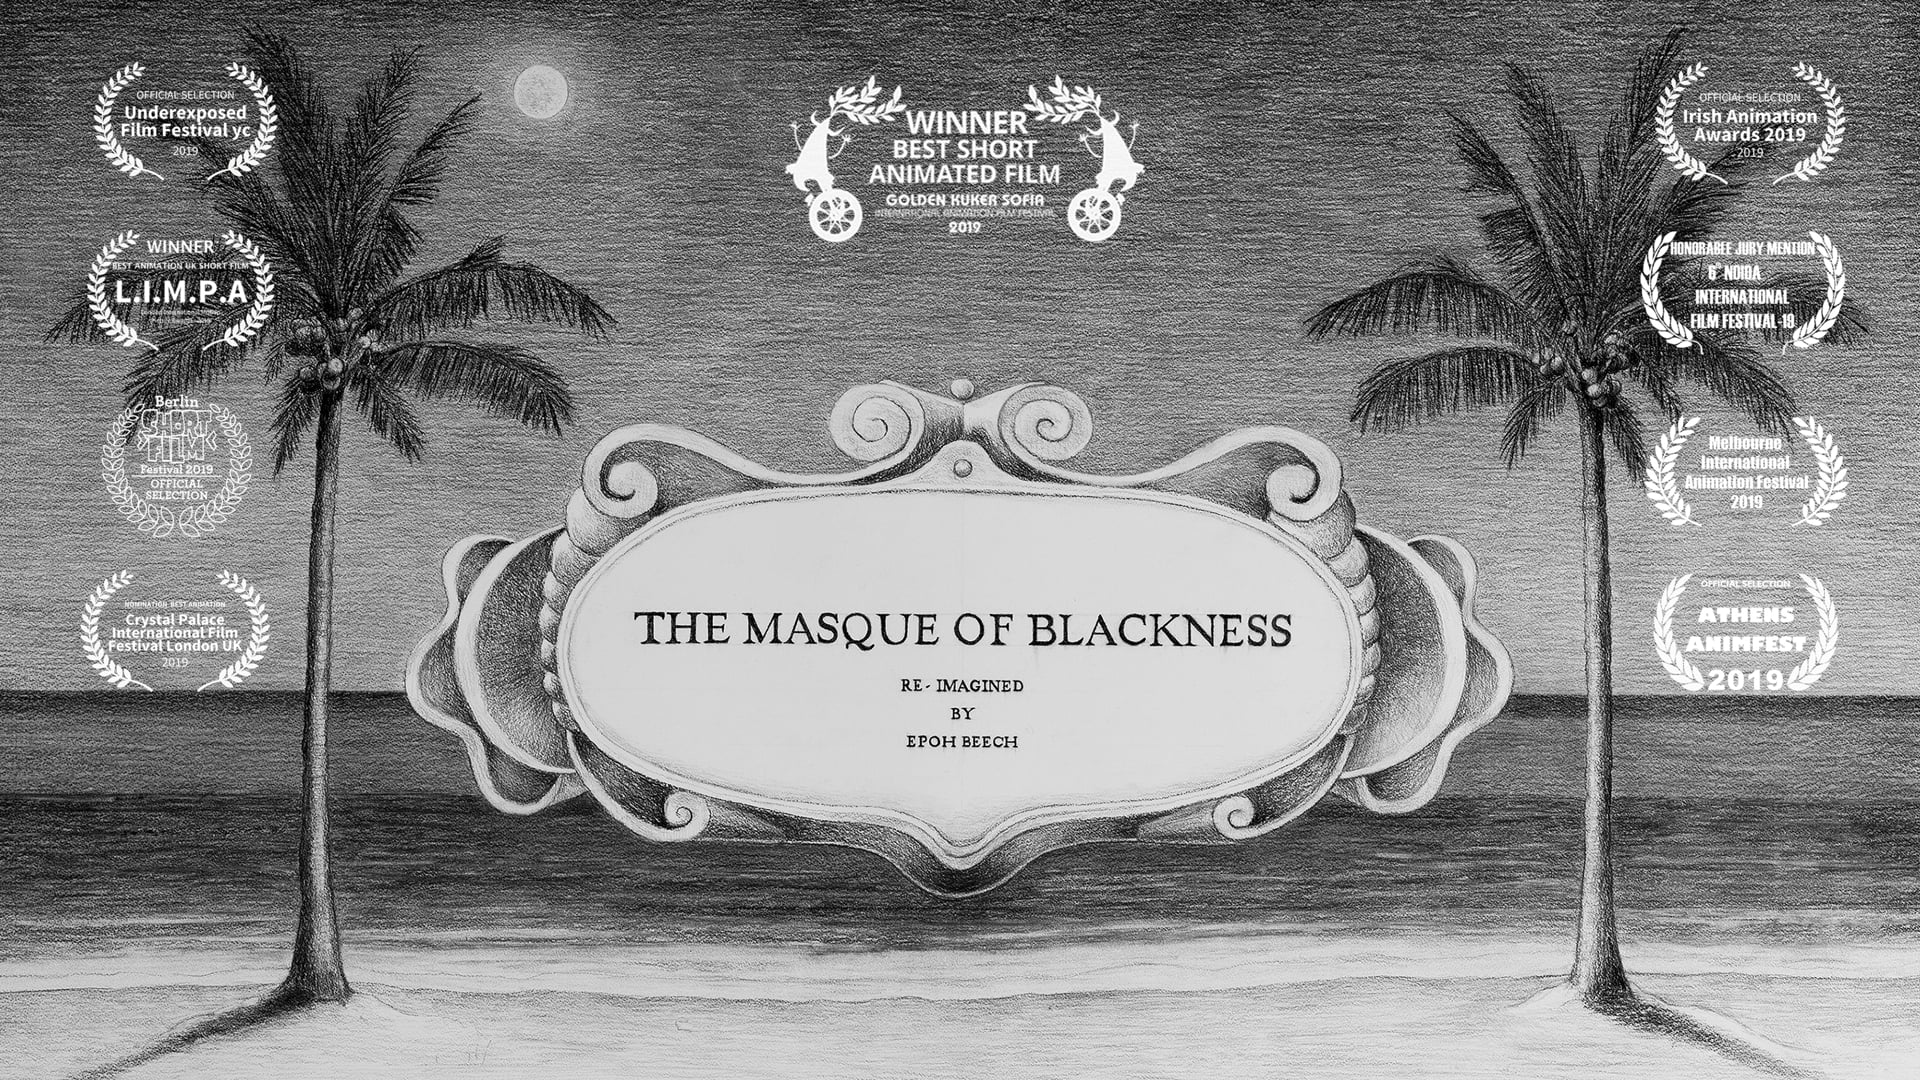 Trailer - The Masque of Blackness by Epoh Beech - extended version